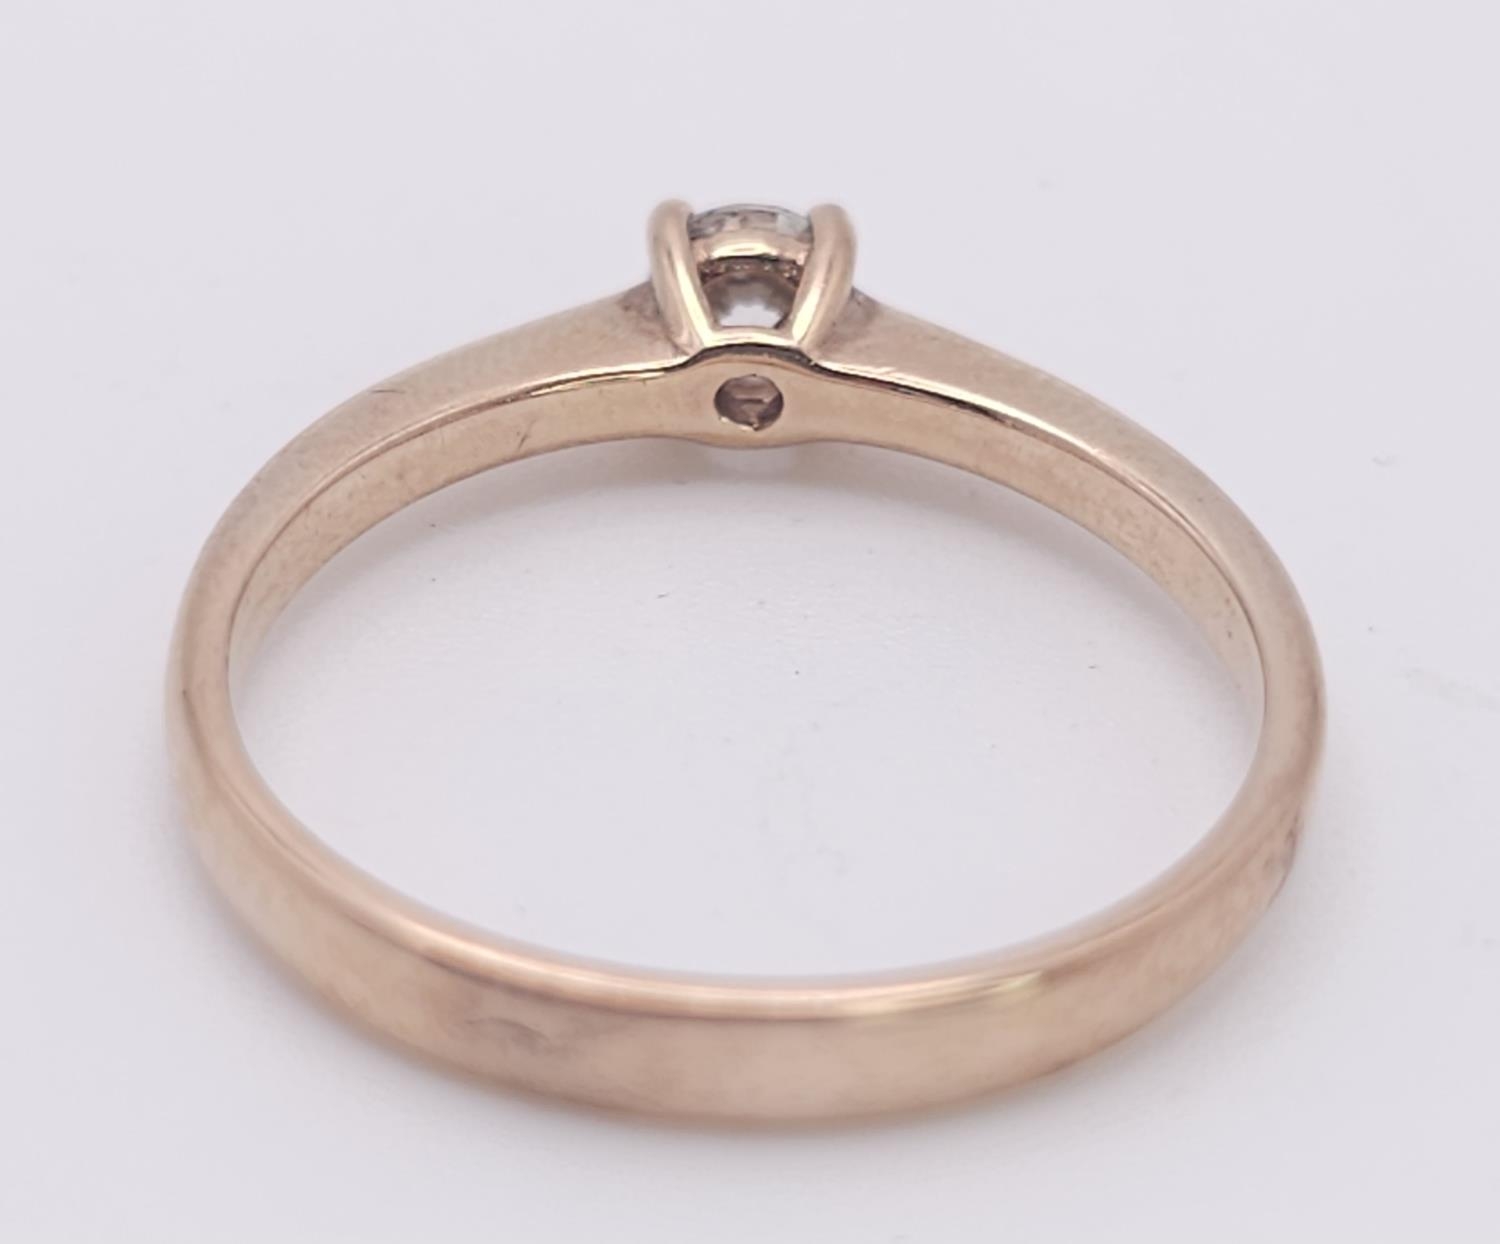 A 9K Rose Gold Diamond Solitaire Ring. 0.10ct round cut diamond. Size N. 2g total weight. - Image 4 of 7